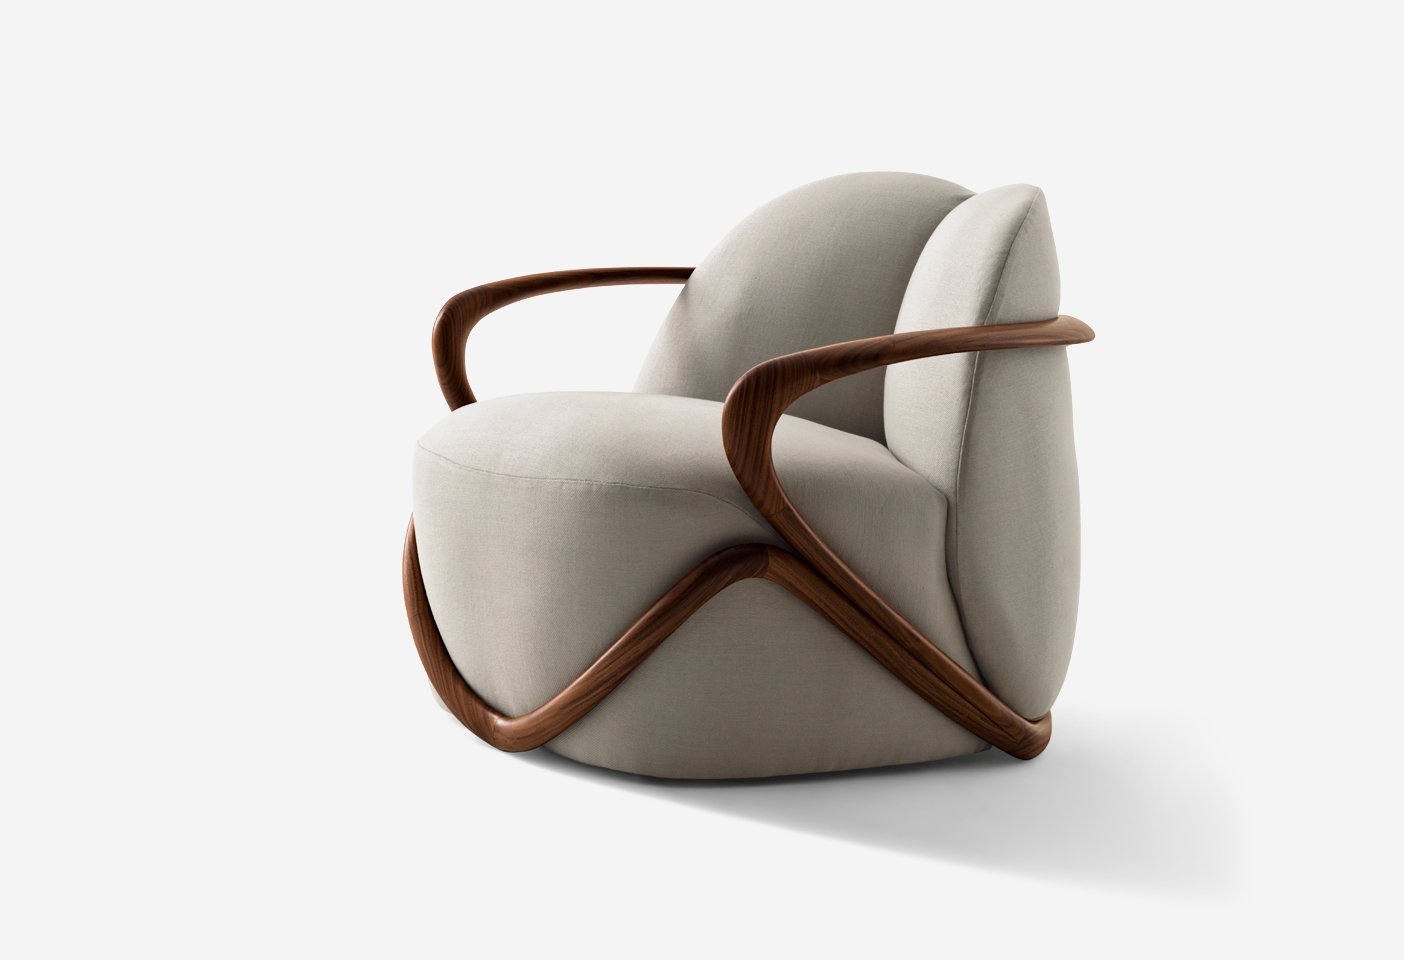 The Hug armchair designed by Rossella Pugliatti for Giorgetti is designed around the narrative of 'space'. It's fluid bentwood frame contains the soft unpholstered seat and back, literally and figuratively hugging you as you sit. Photo c/o Giorgetti.